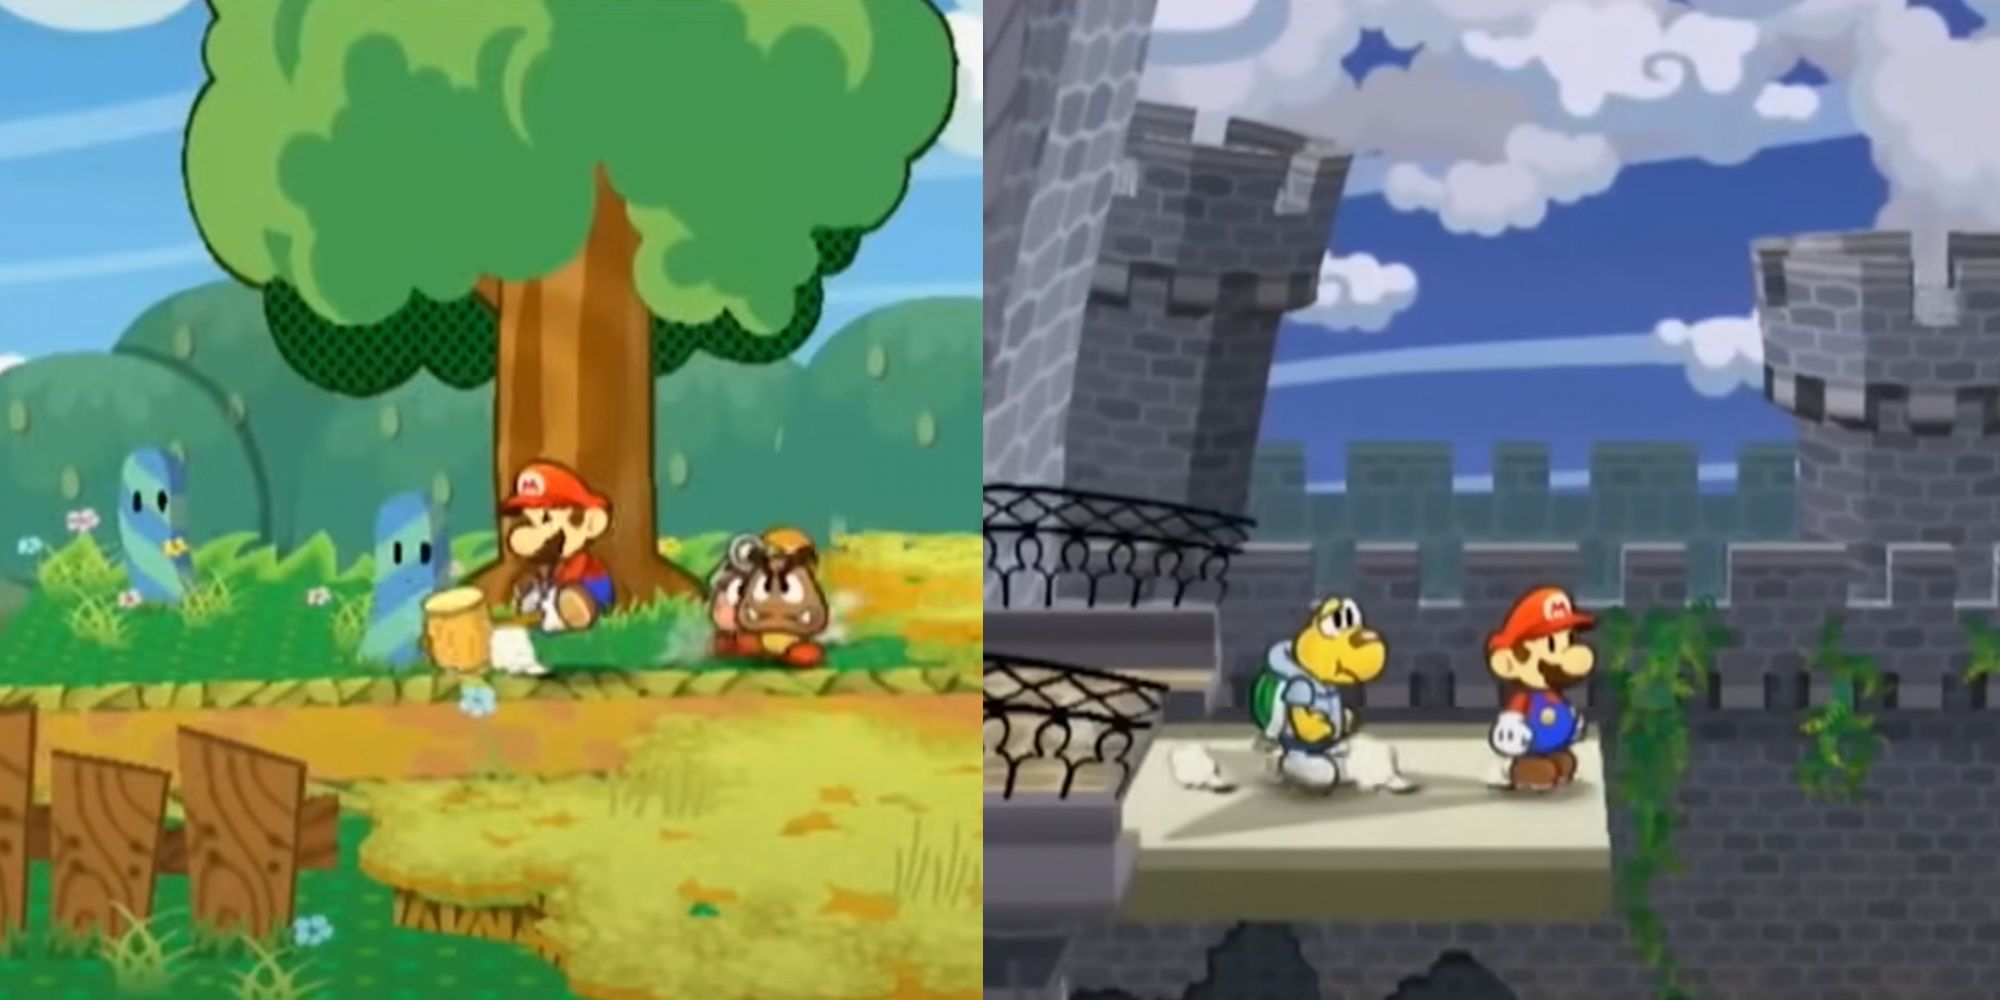 Paper Mario smashing something with his hammer, and Mario and a Koopa stood at the end of a bridge